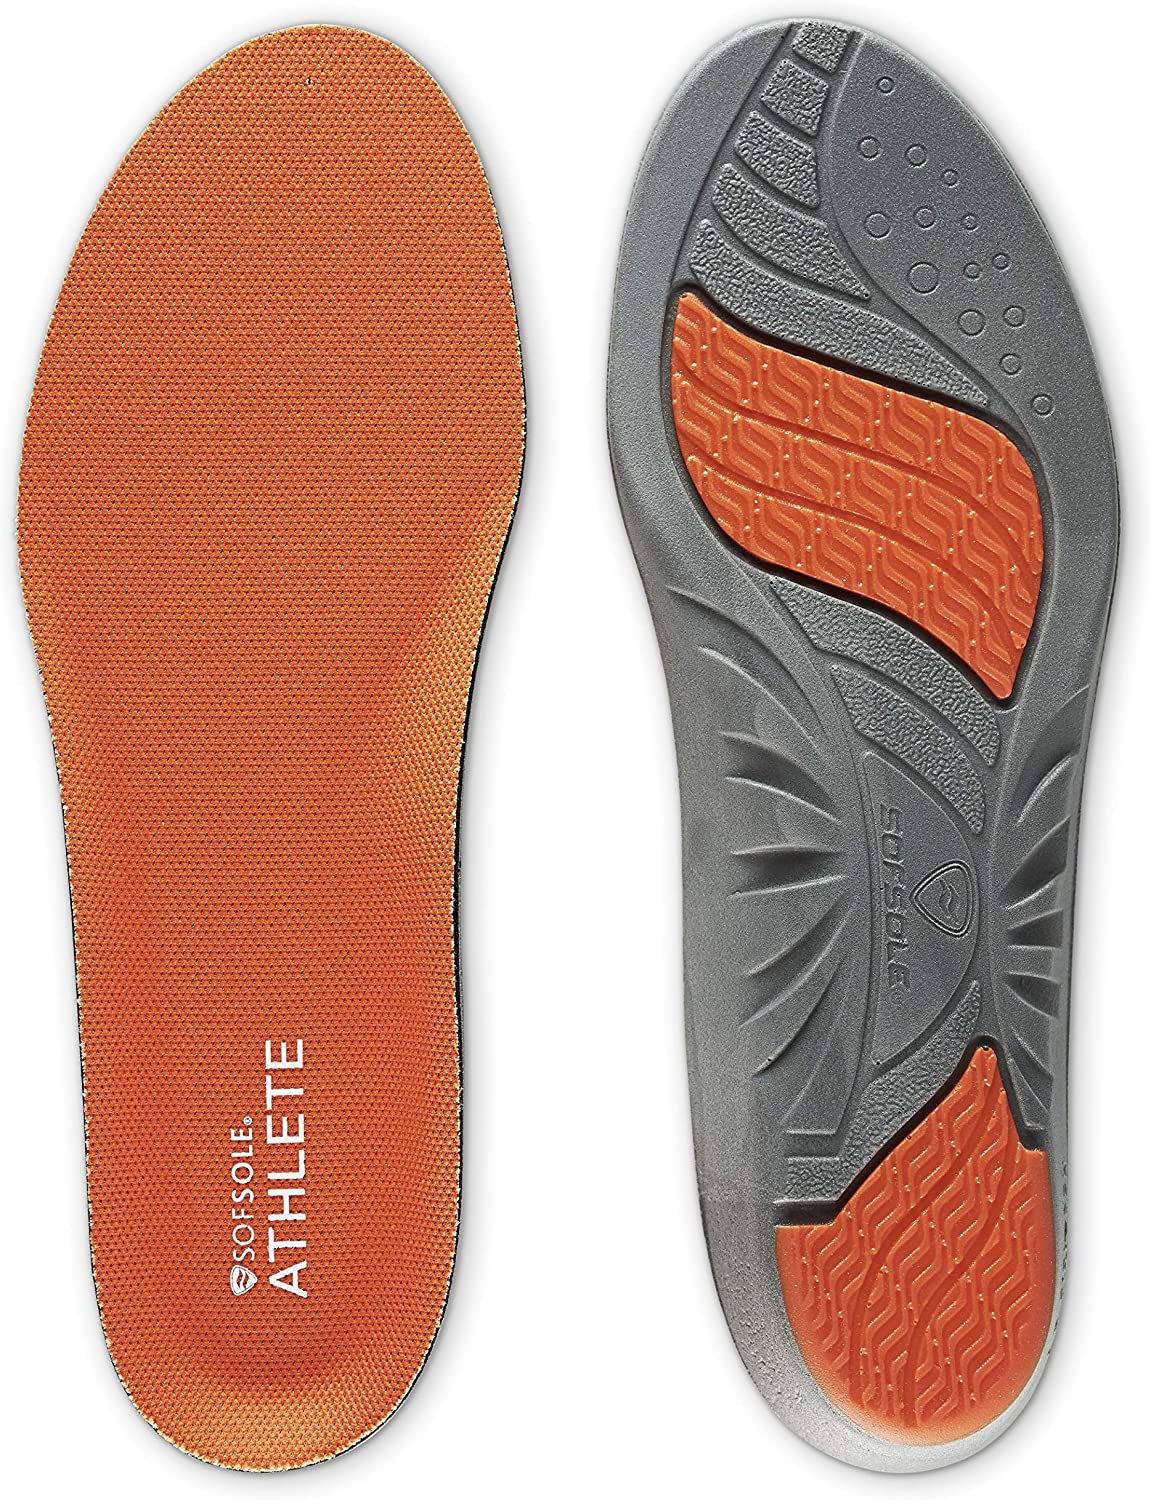 Sof Sole Insoles